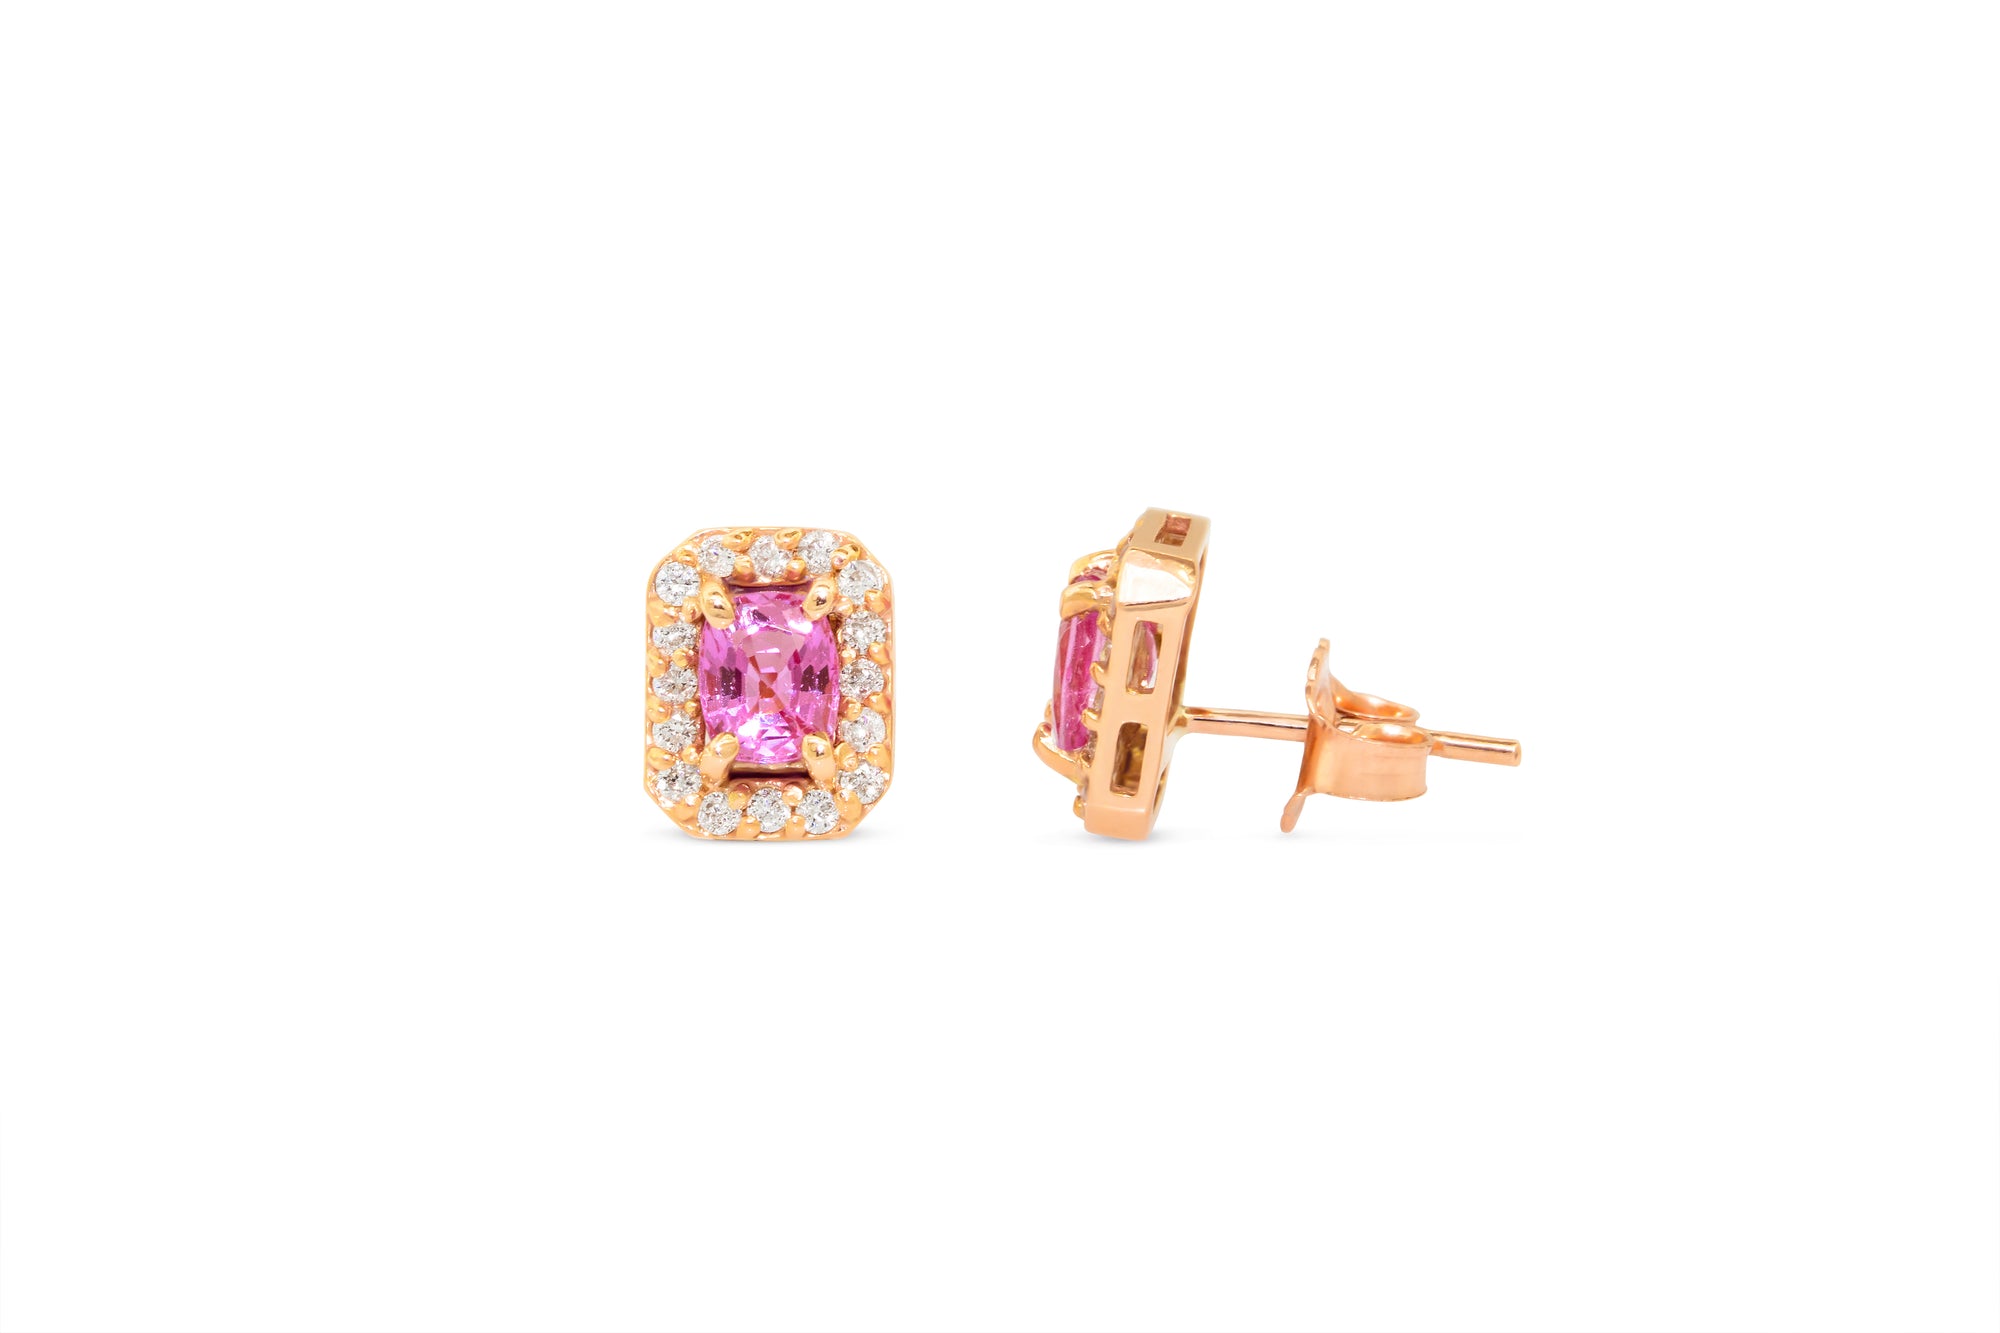 1.00 CT Oval Pink Sapphire Diamond Earring 0.27 CT TW Diamonds 14K Rose Gold PSER004 - NorthandSouthJewelry